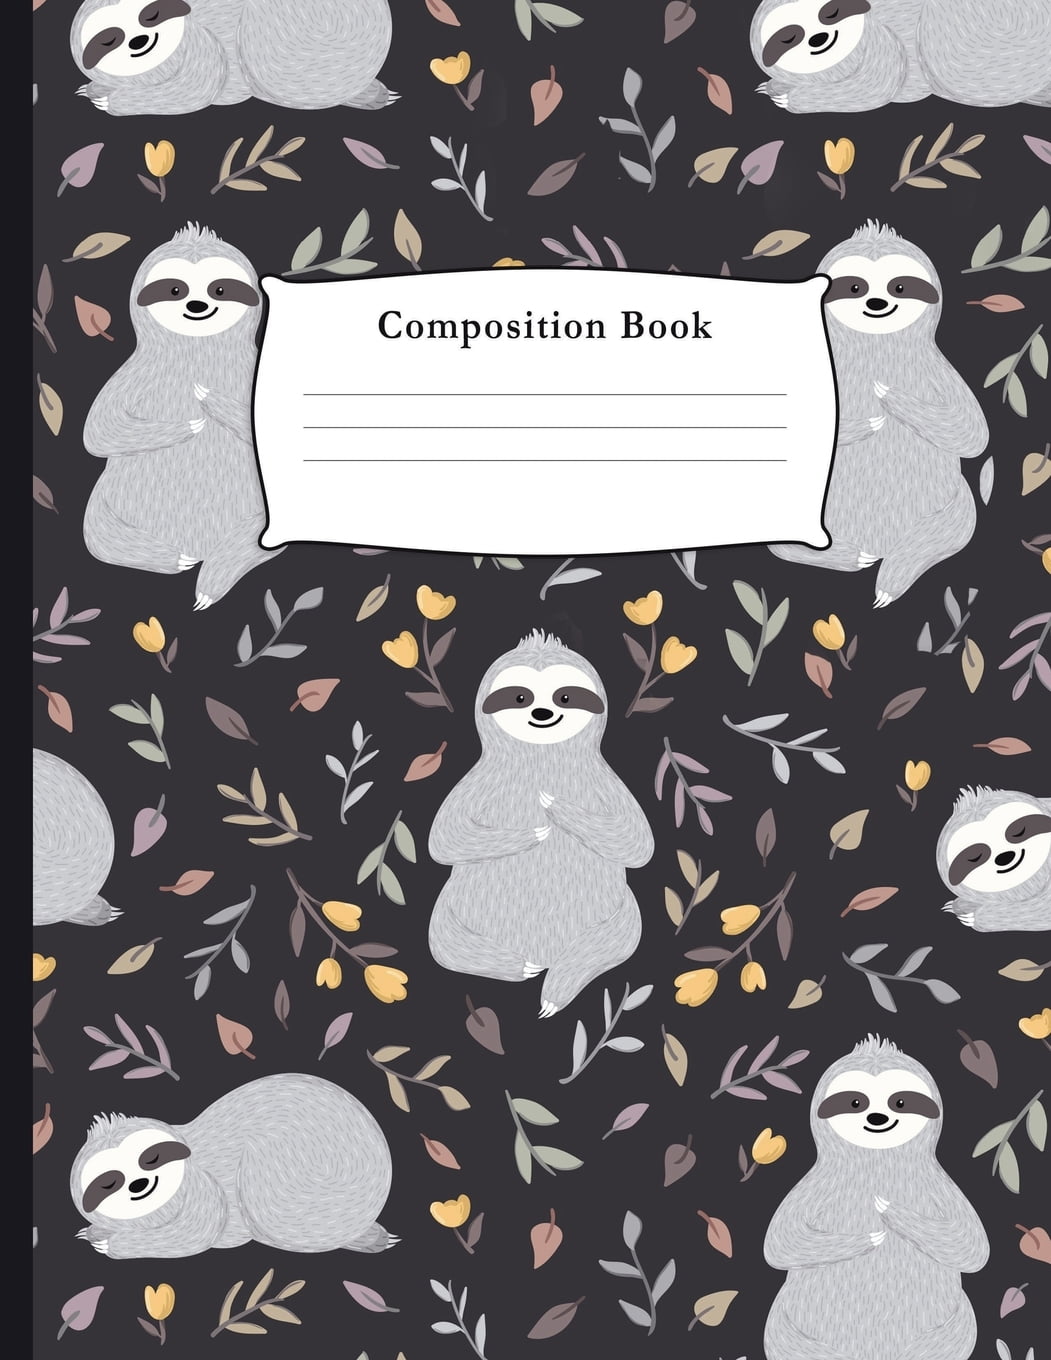 Composition-Book-Sloths-College-Ruled-Notebook-for-Taking-Notes-Journaling-School-or-Work-for-Girls-Sloth-Notebooks